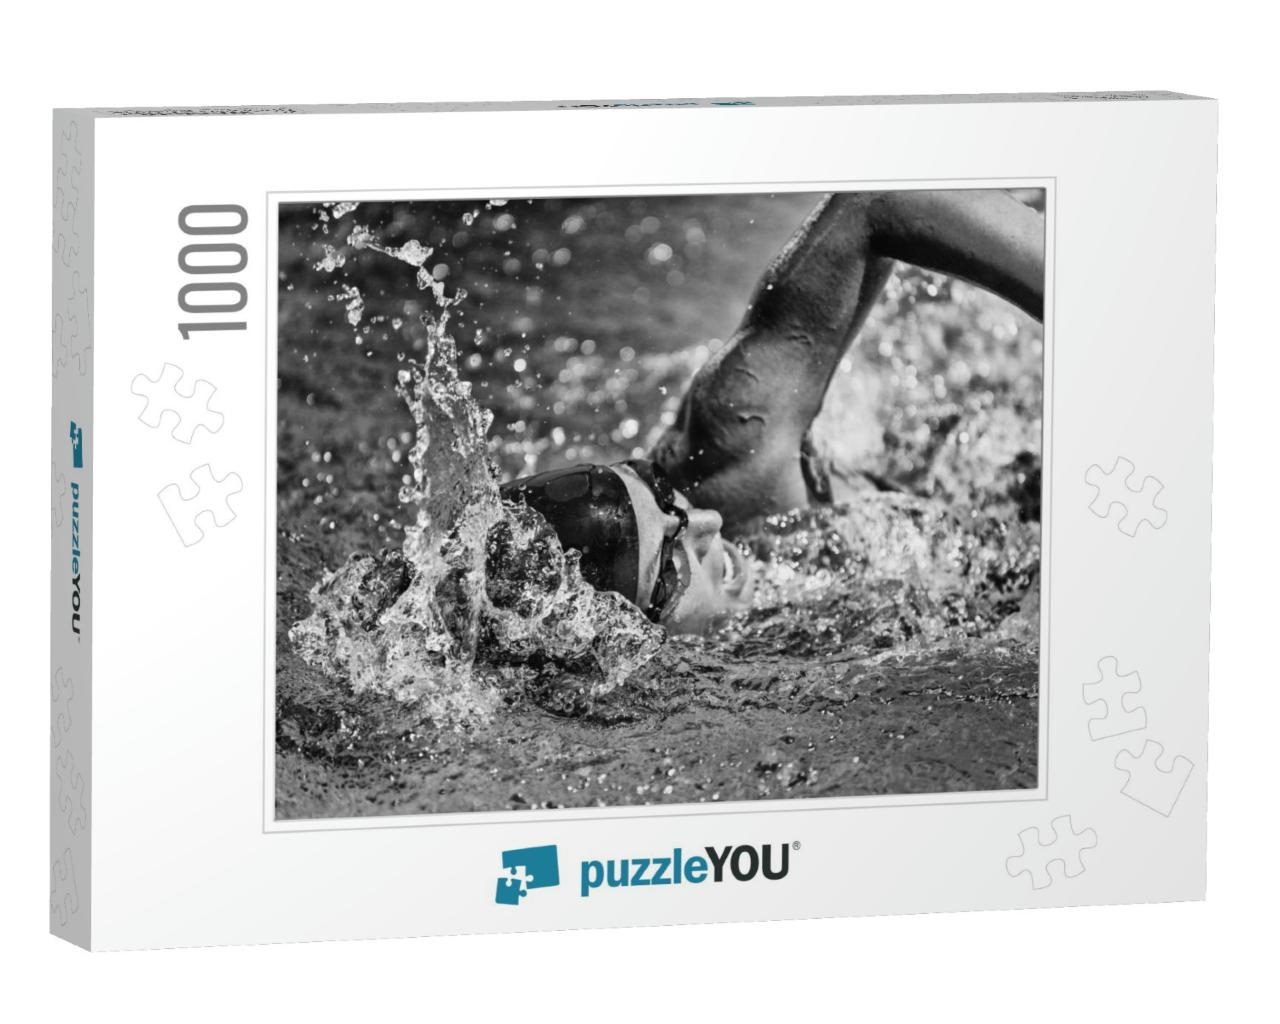 Swimming Fast - High Speed Action Shot in Black & White... Jigsaw Puzzle with 1000 pieces